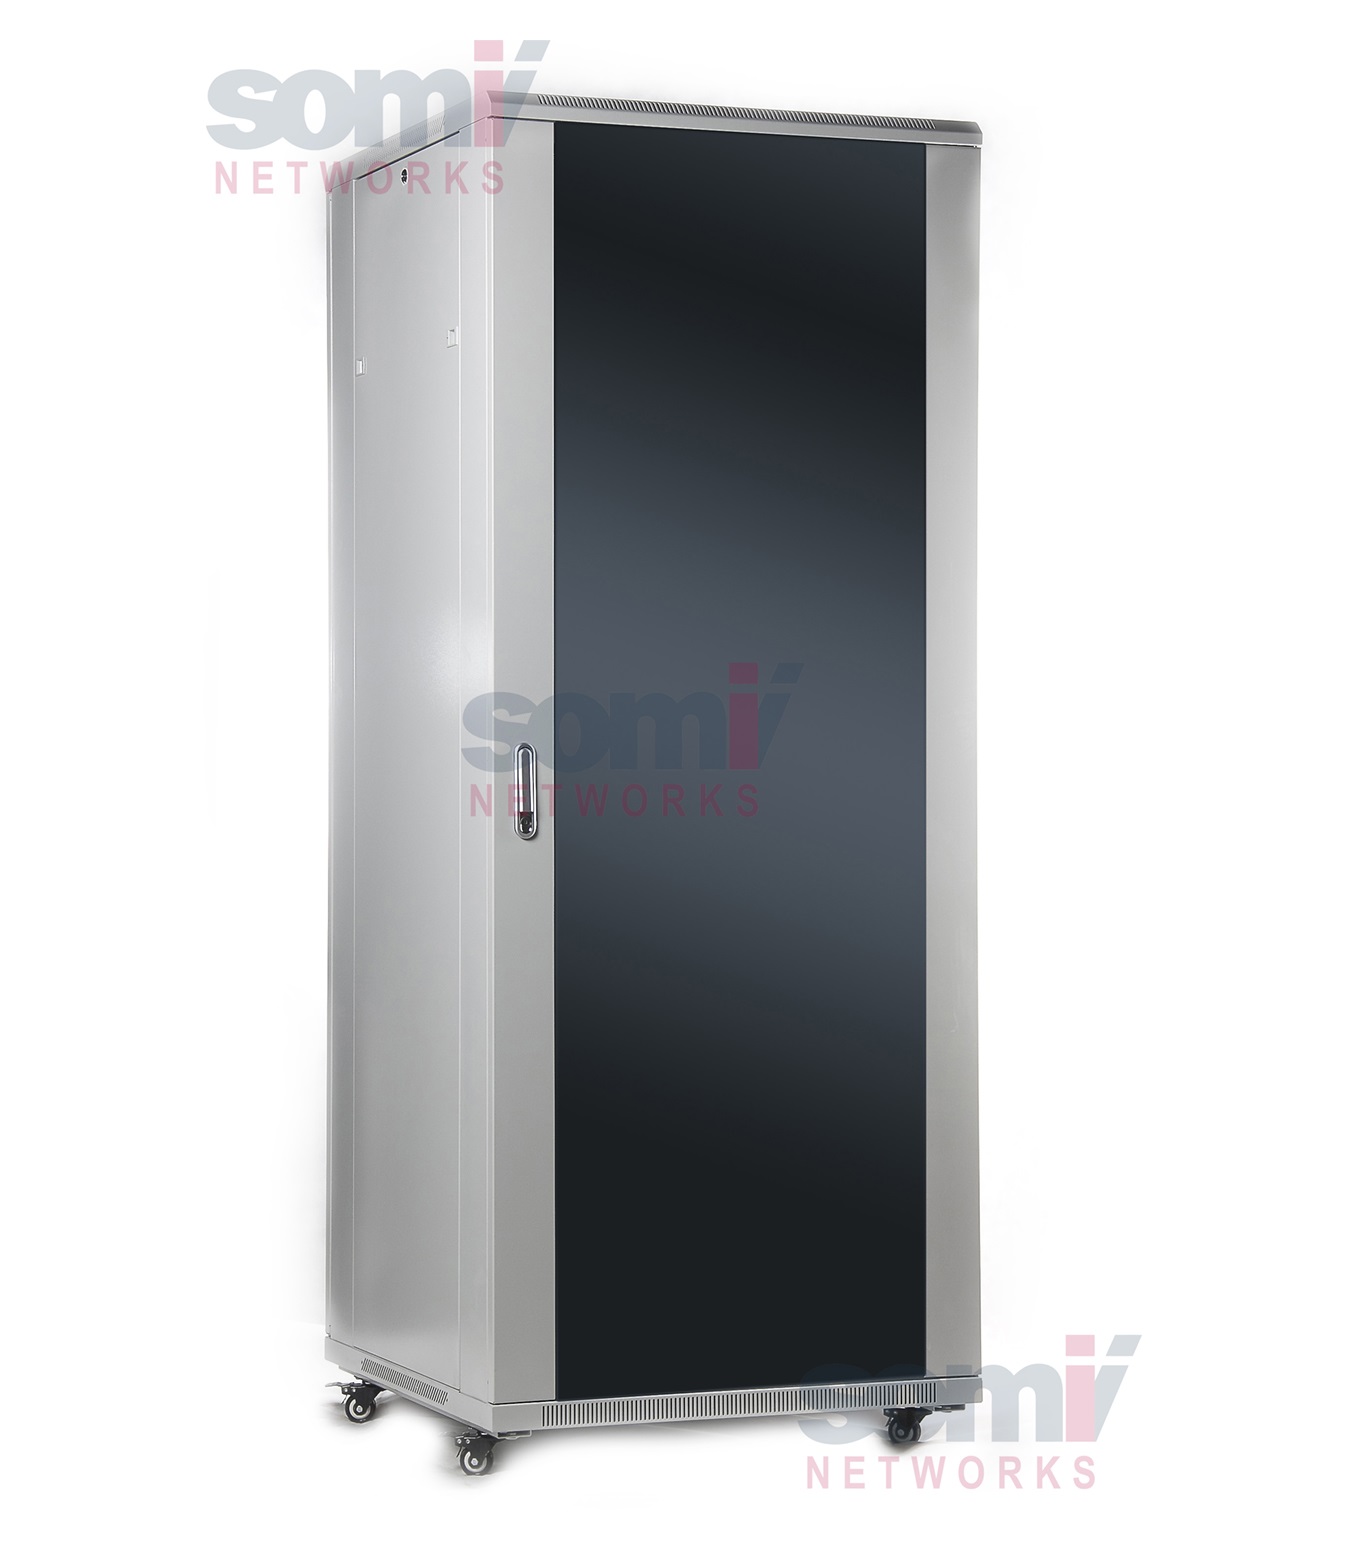 Freestanding Cabinets 19 Na Series Heights From 15u To 45u